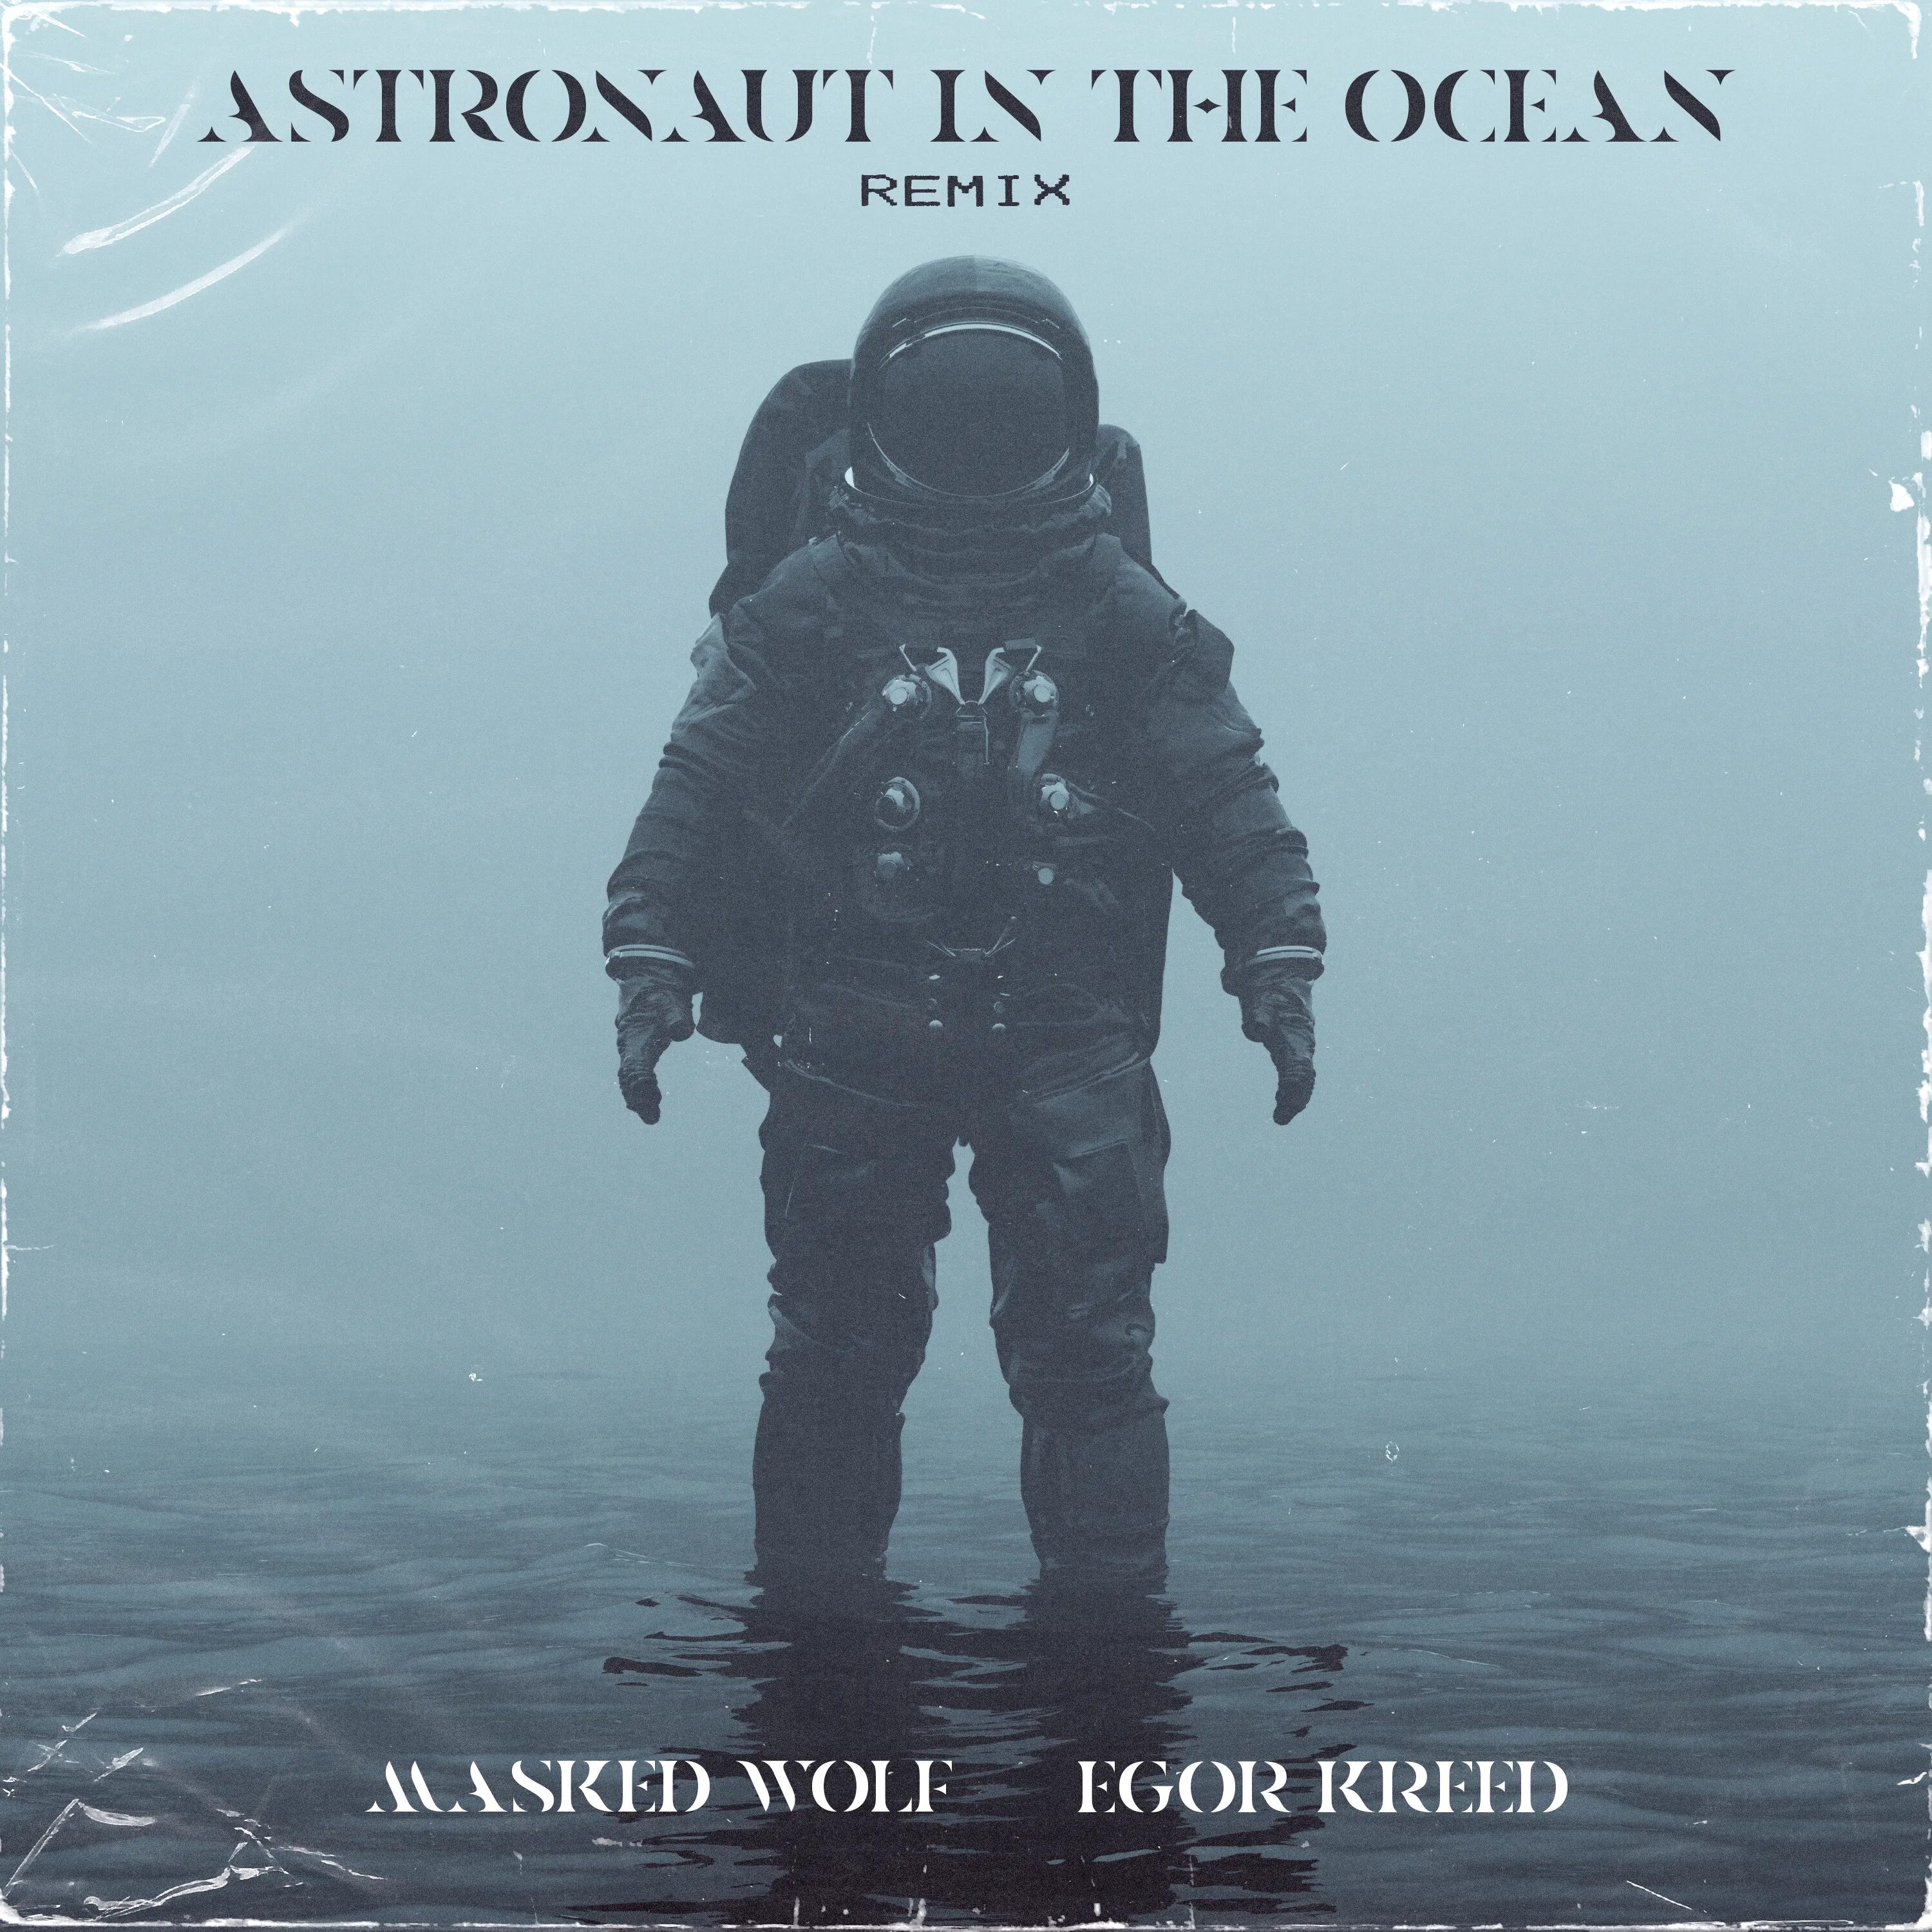 What you know about rolling down. Маскед Вольф Astronaut. Астронавт оушен. Астронавт in the Ocean. Обложка песни Astronaut in the Ocean.